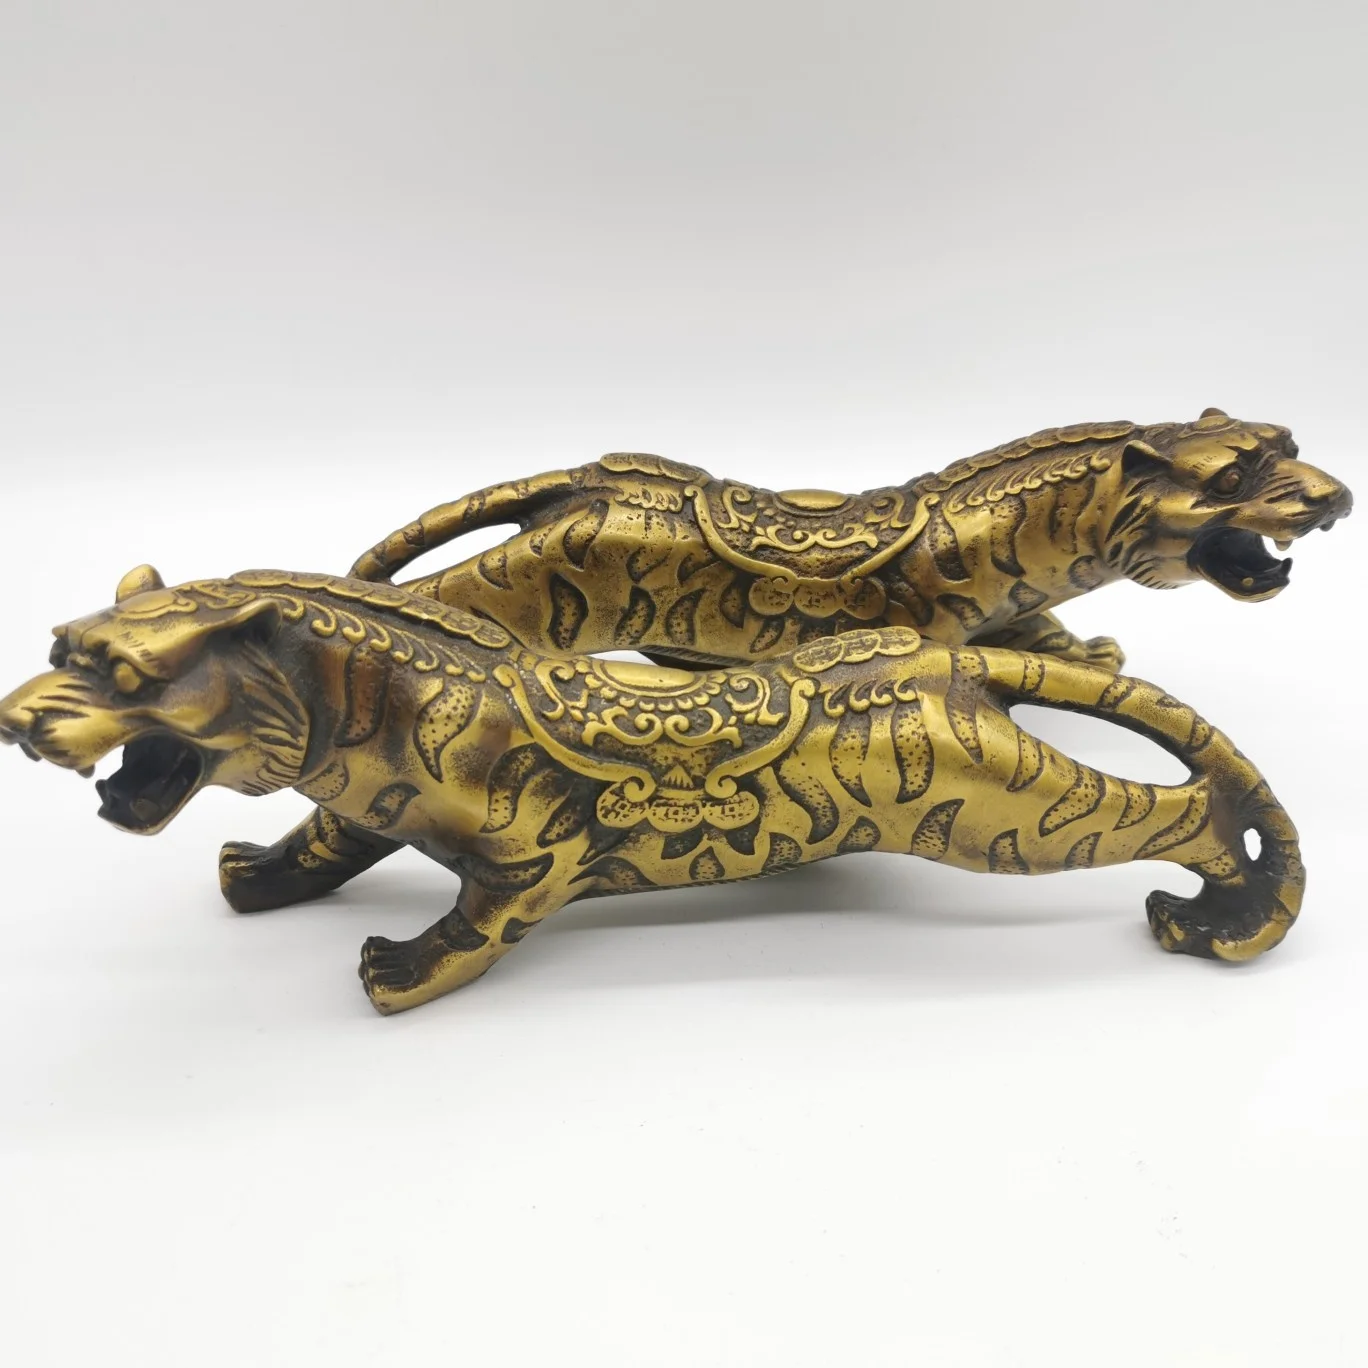 

Chinese Antique Bronze Brass Zodiac Animal Tiger Ornament Statue Geomancy Fengshui Good Luck Wealth Office Home Decoration